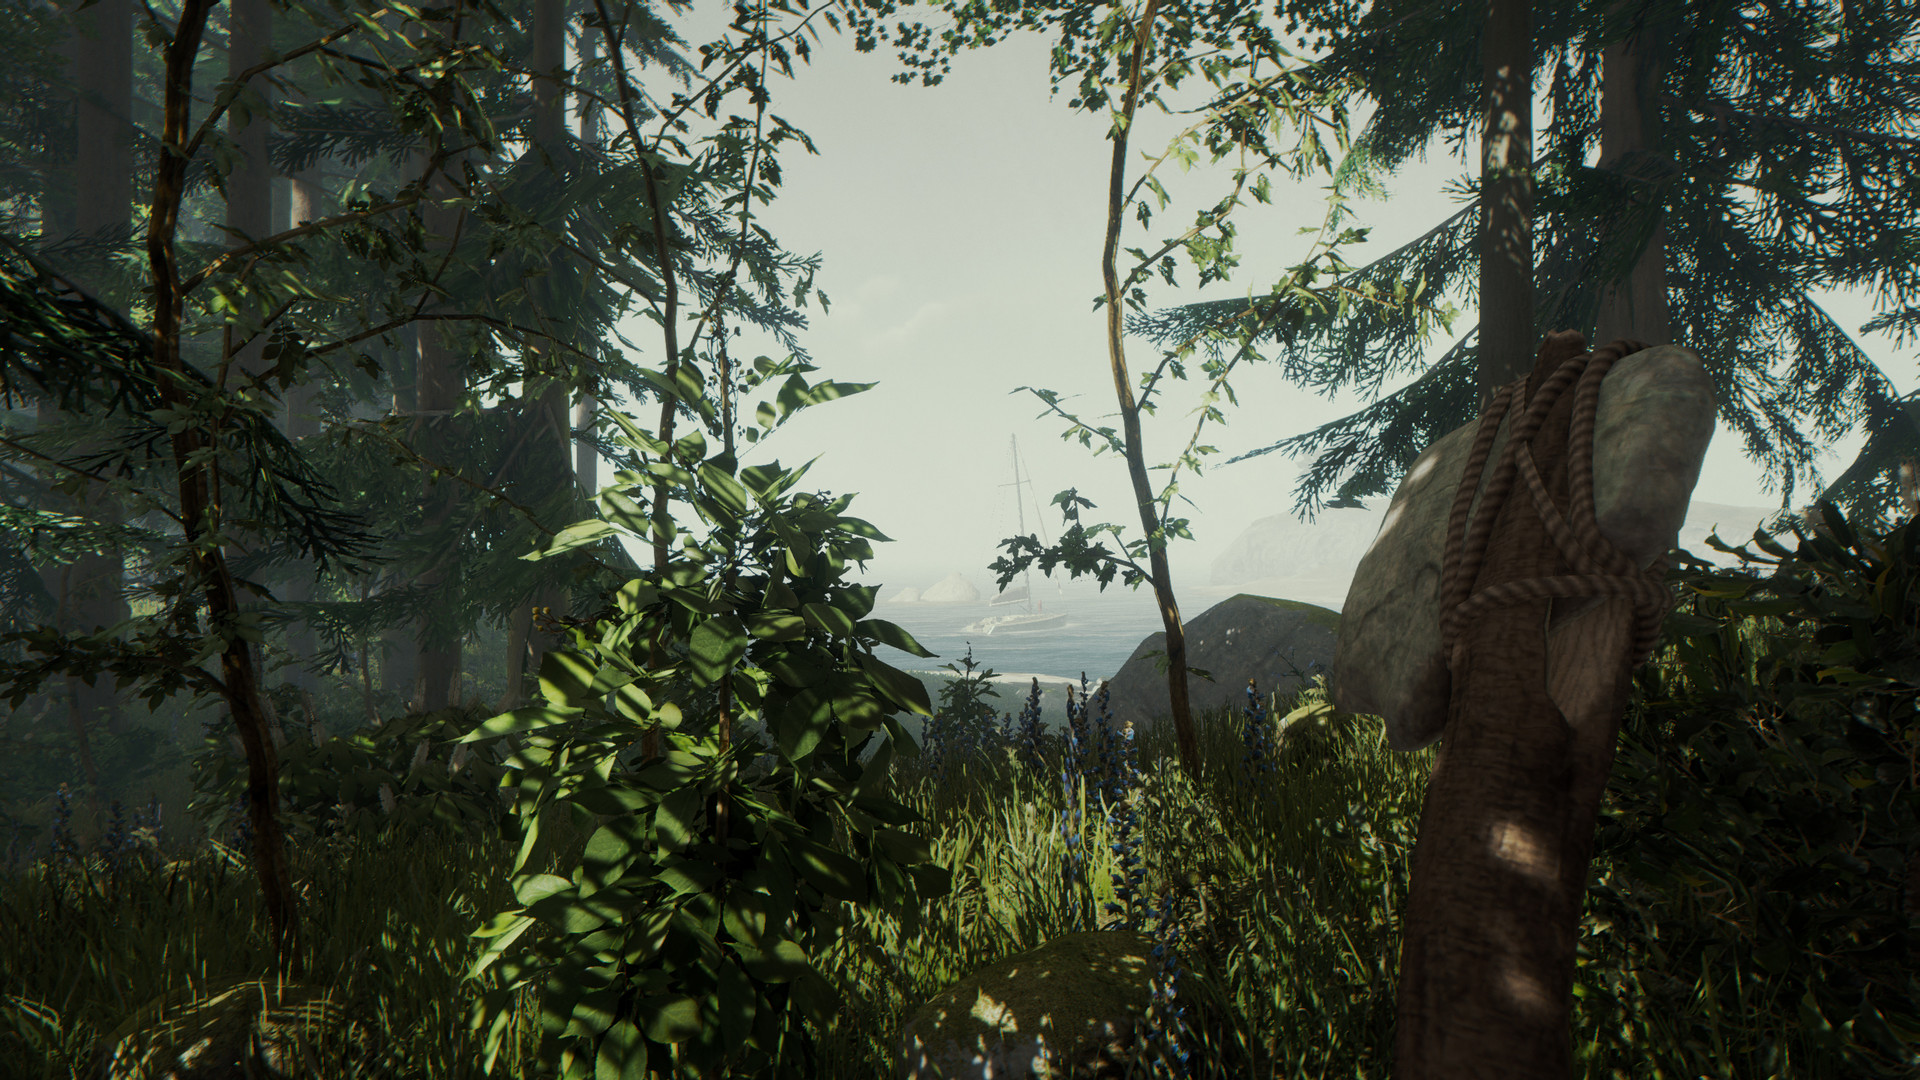 Sons of the Forest' early access: Release date, price, and